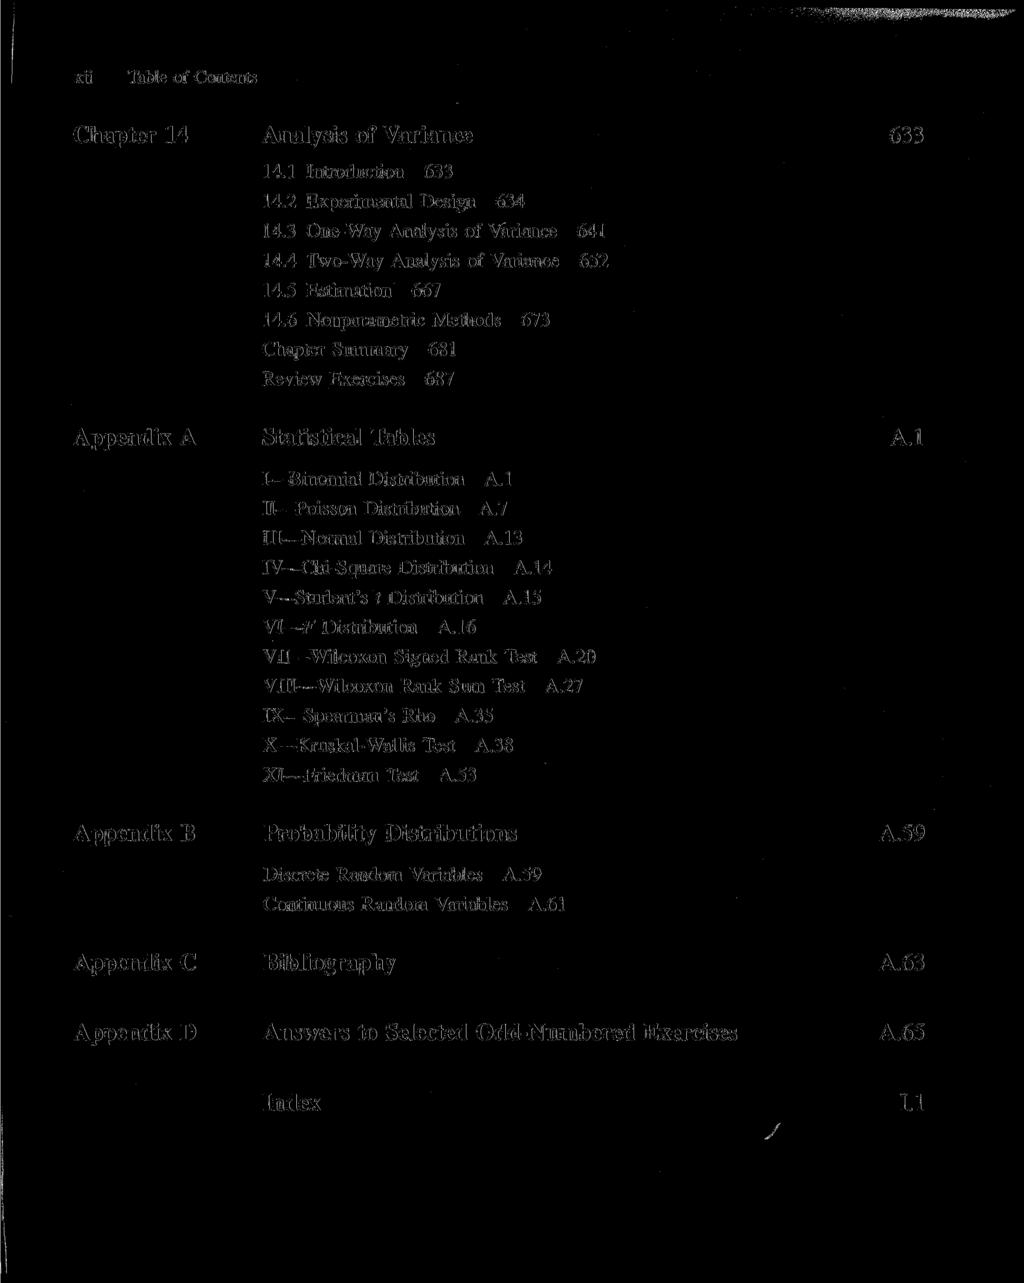 - xii Table of Contents Chapter 14 Appendix A Analysis of Variance 14.1 Introduction 633 14.2 Experimental Design 634 14.3 One-Way Analysis of Variance 14.4 Two-Way Analysis of Variance 14.